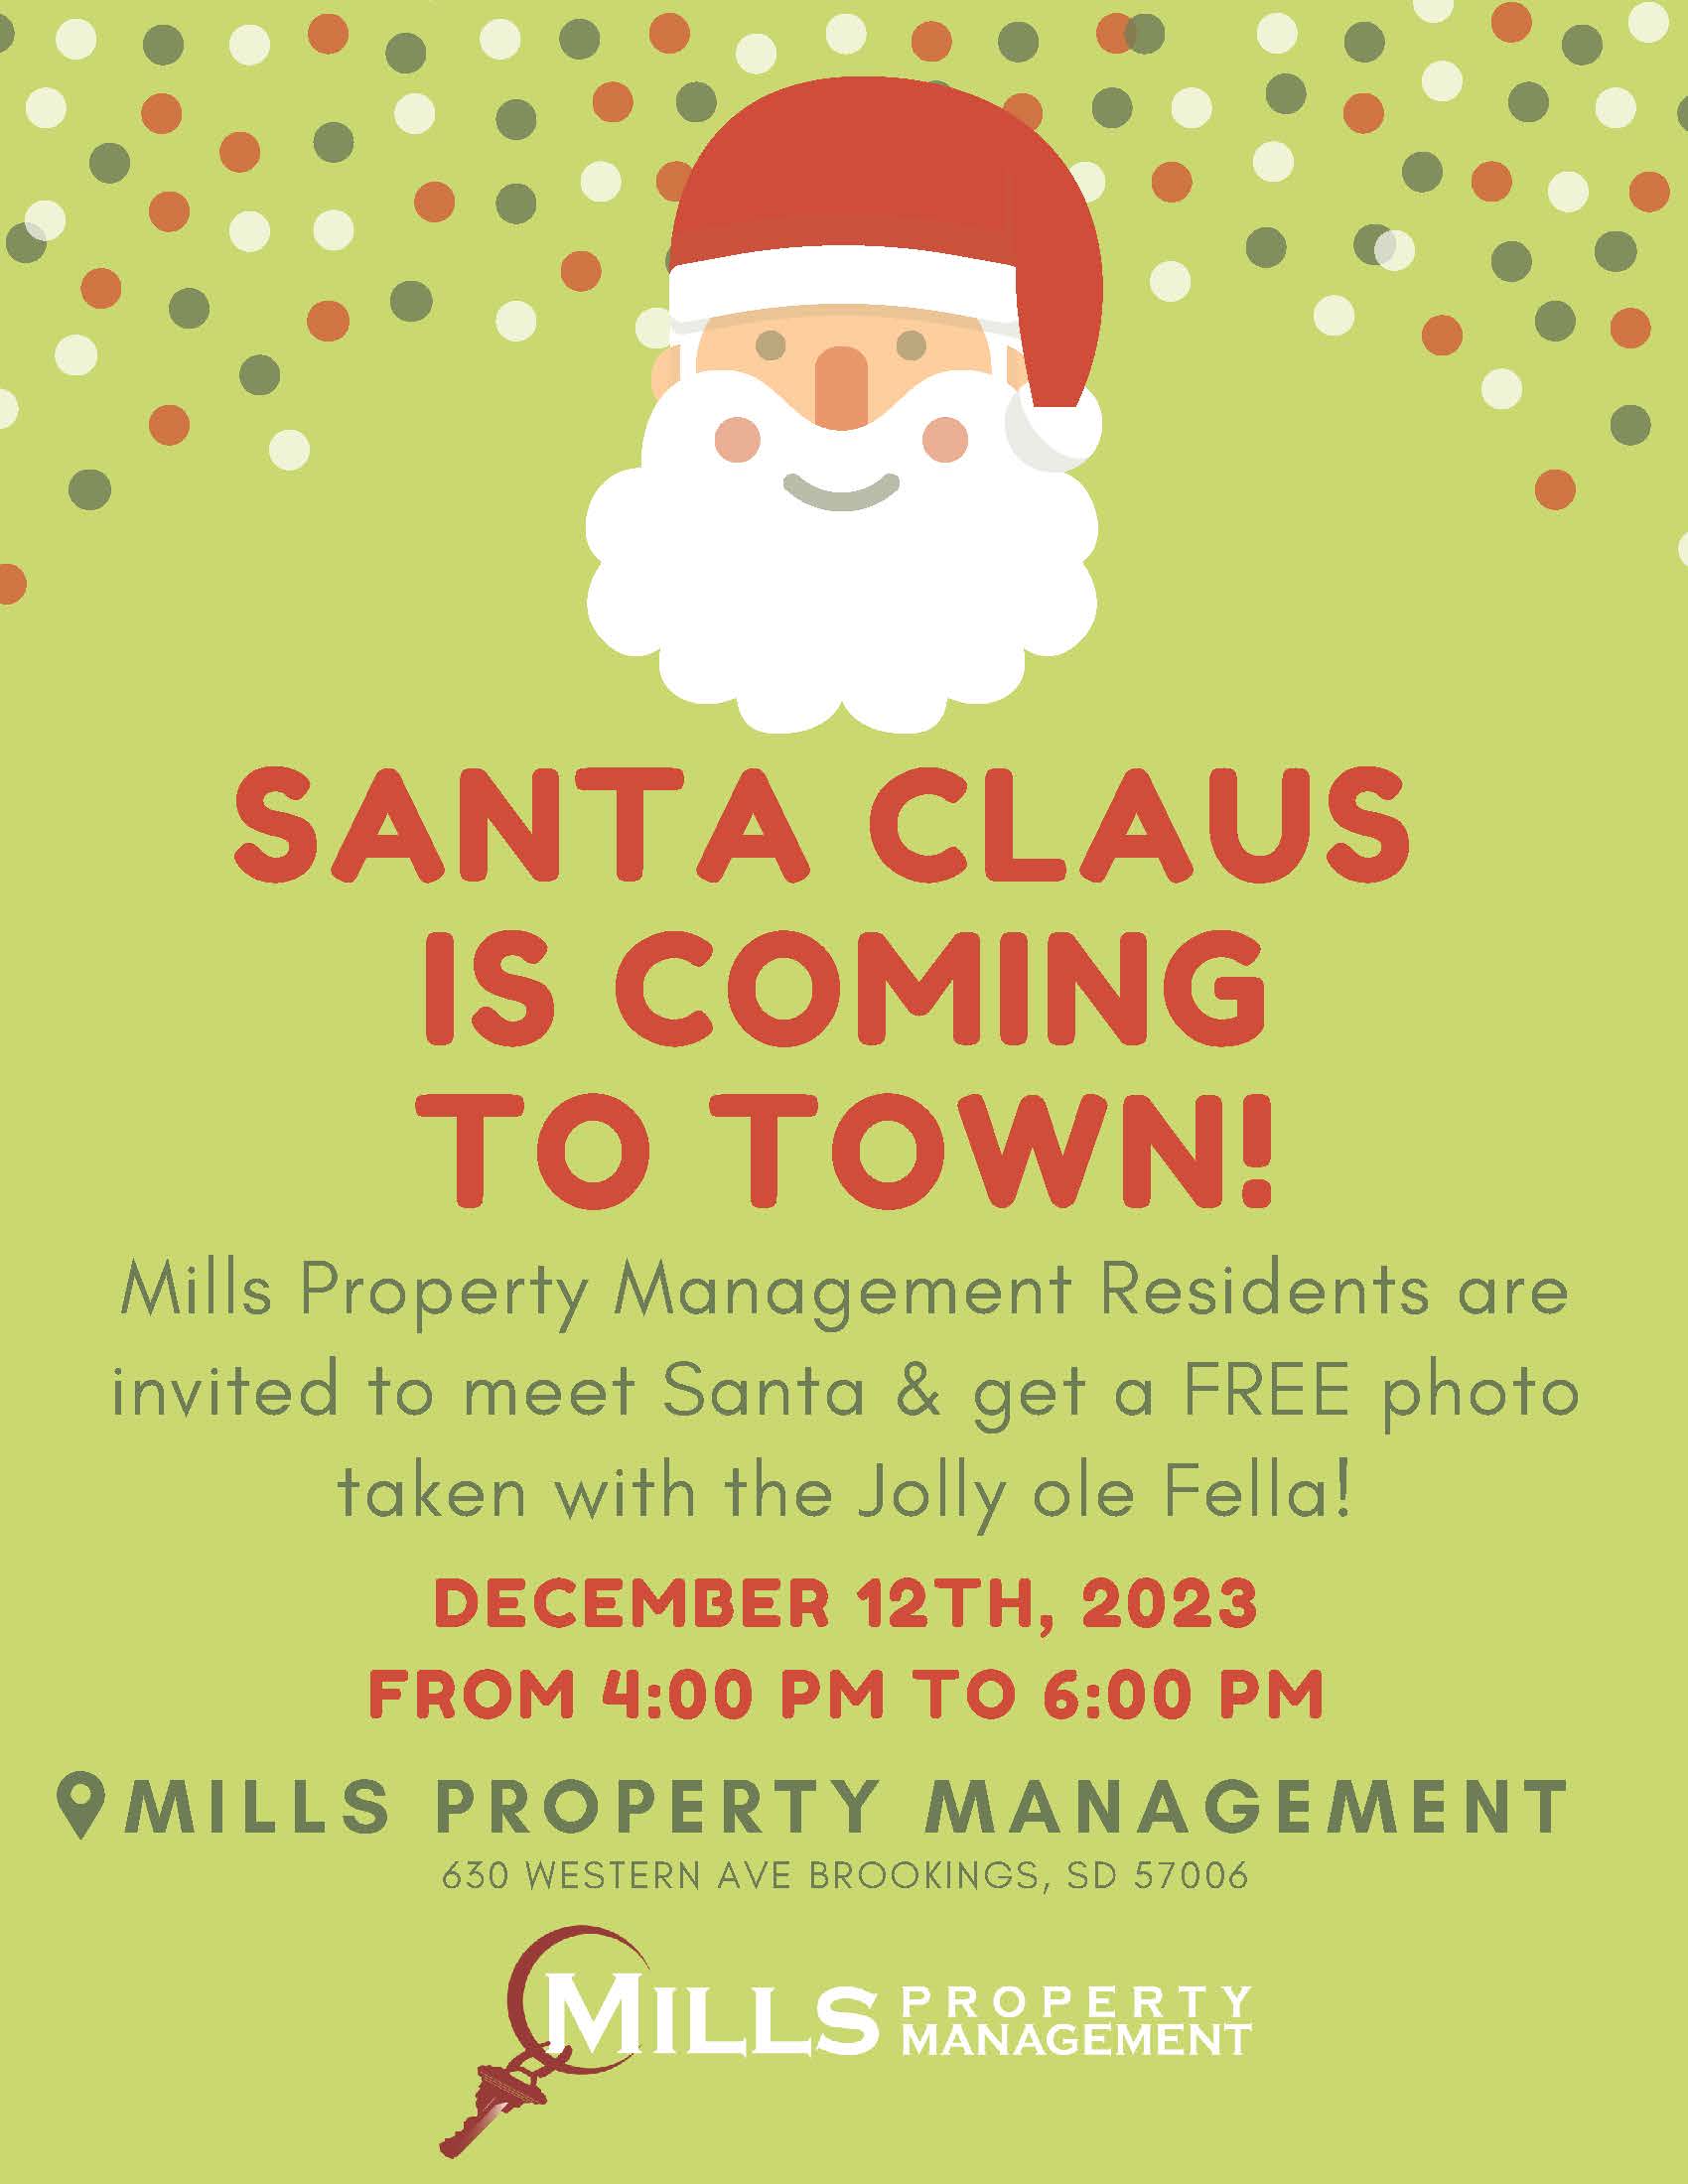 Santa is Coming to Mills Property Management!